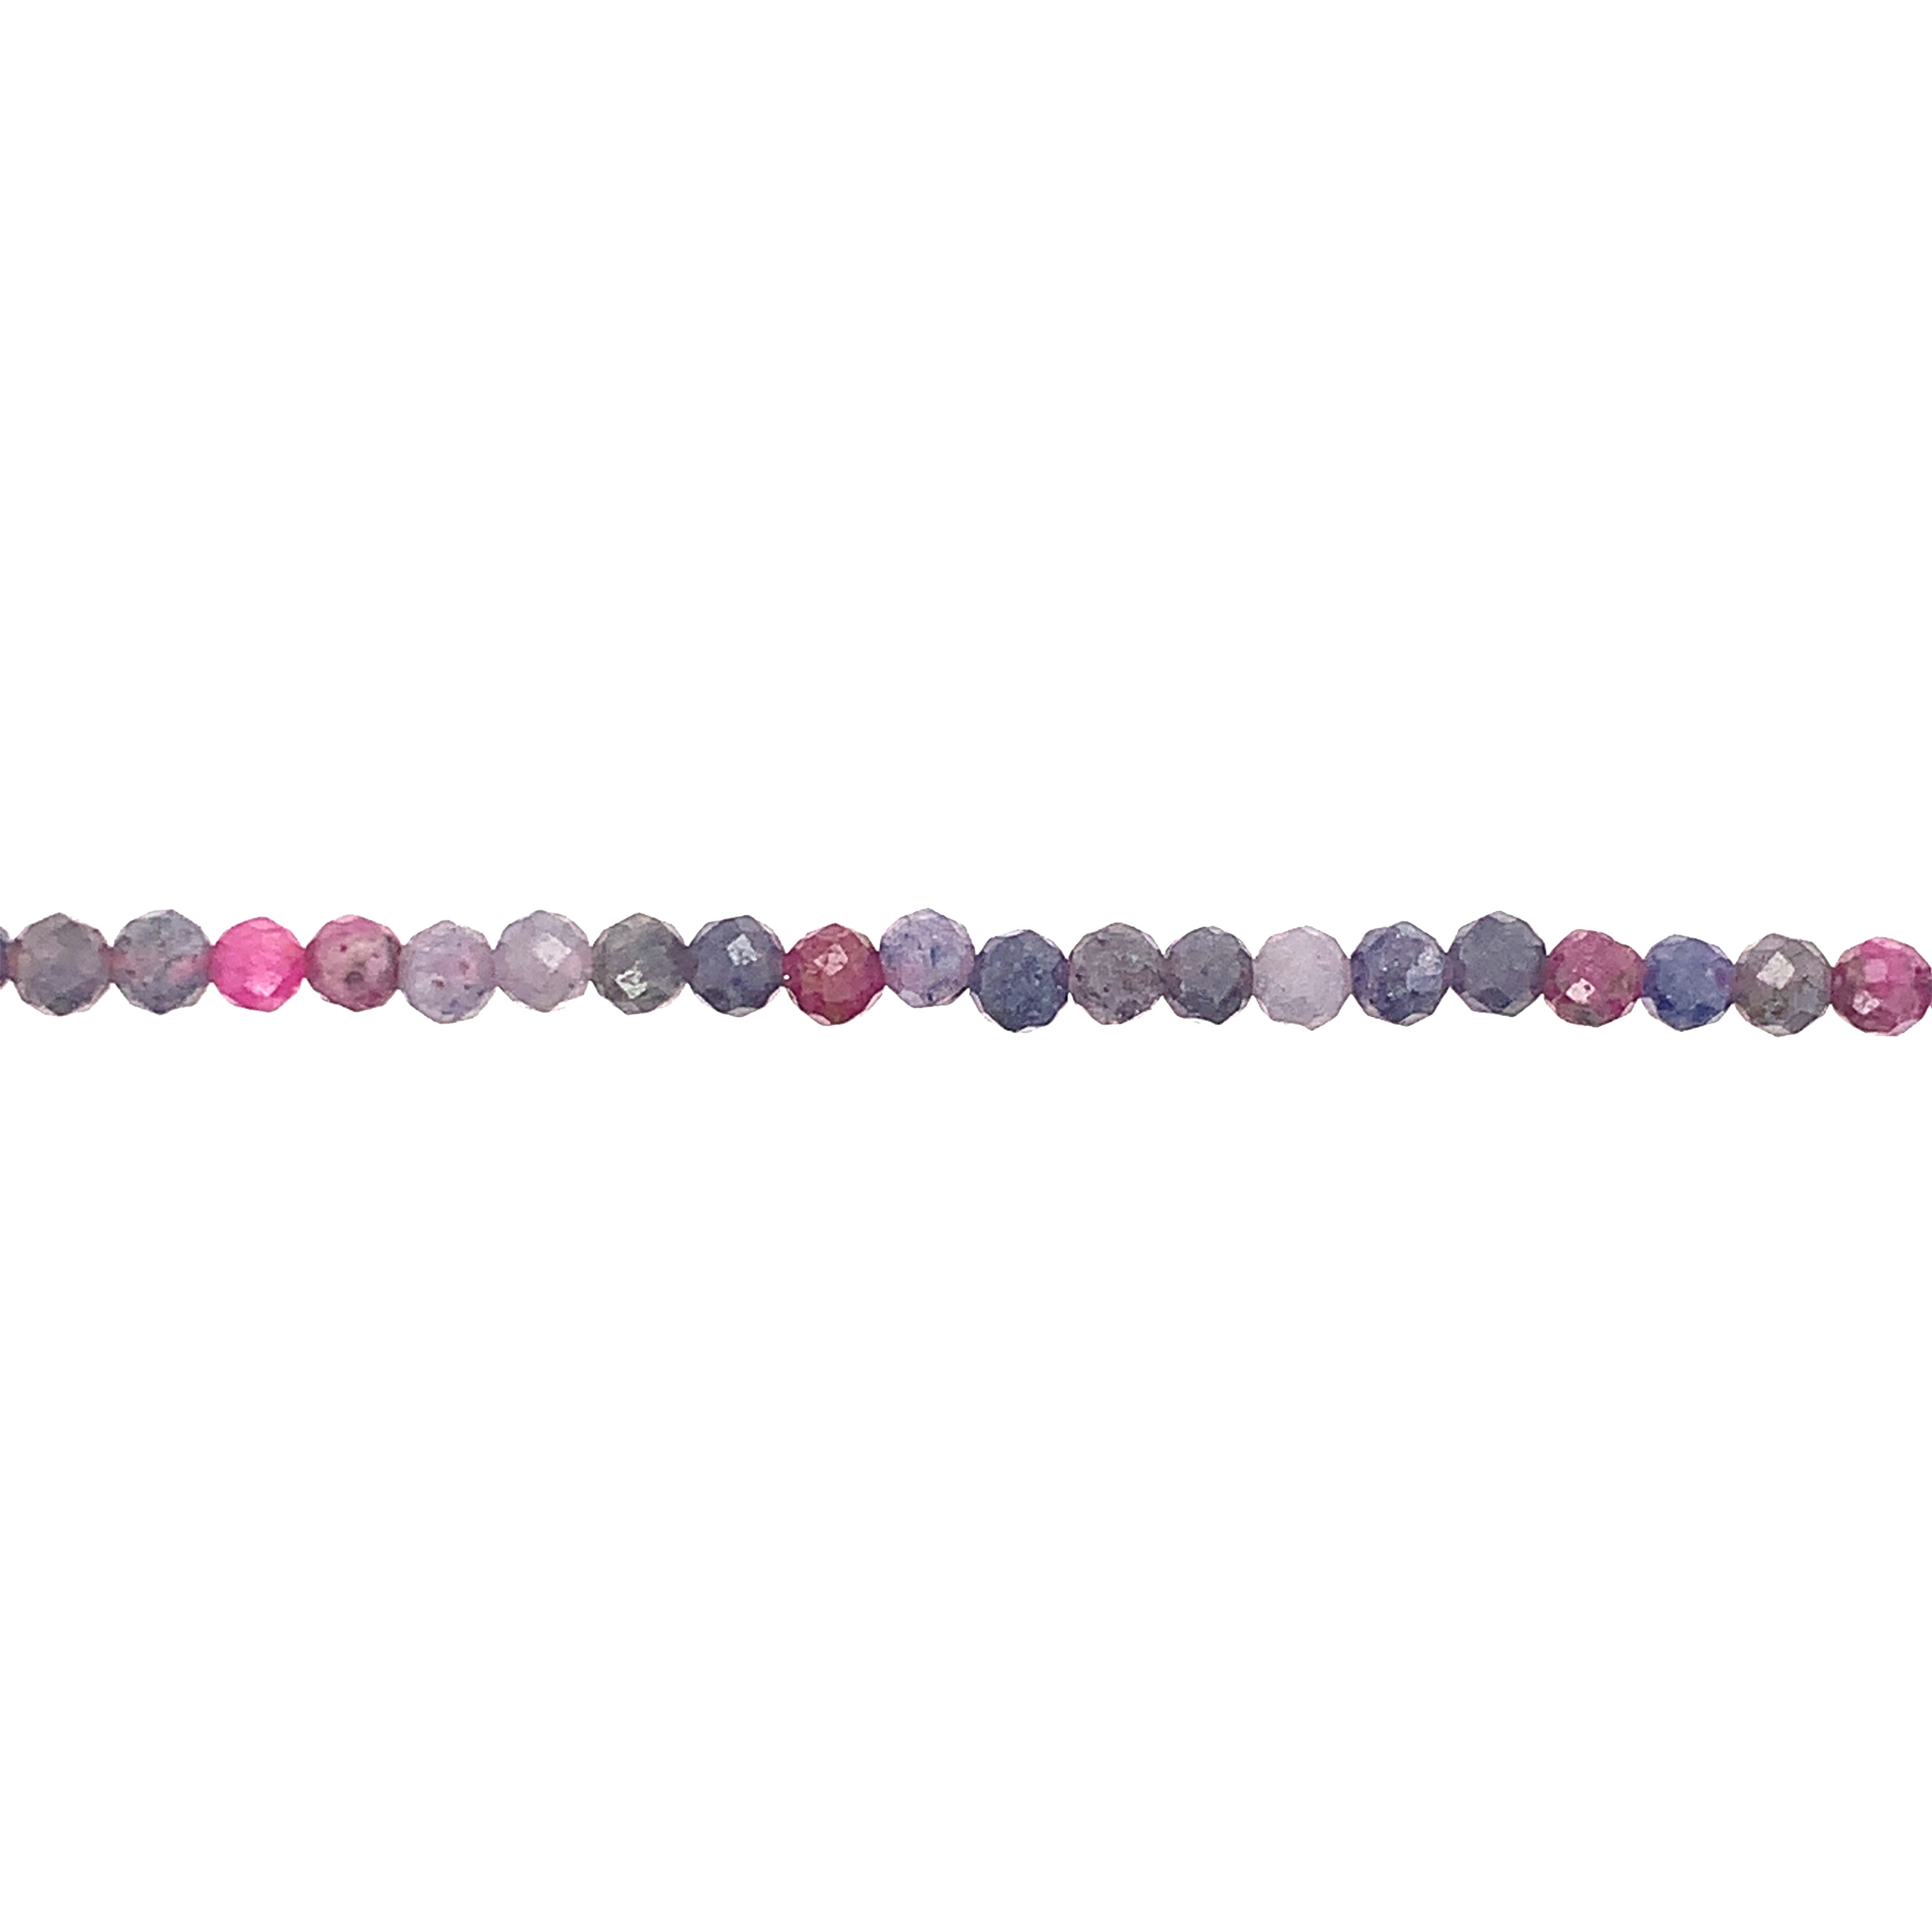 4mm Ruby and Saphire Beads - Faceted